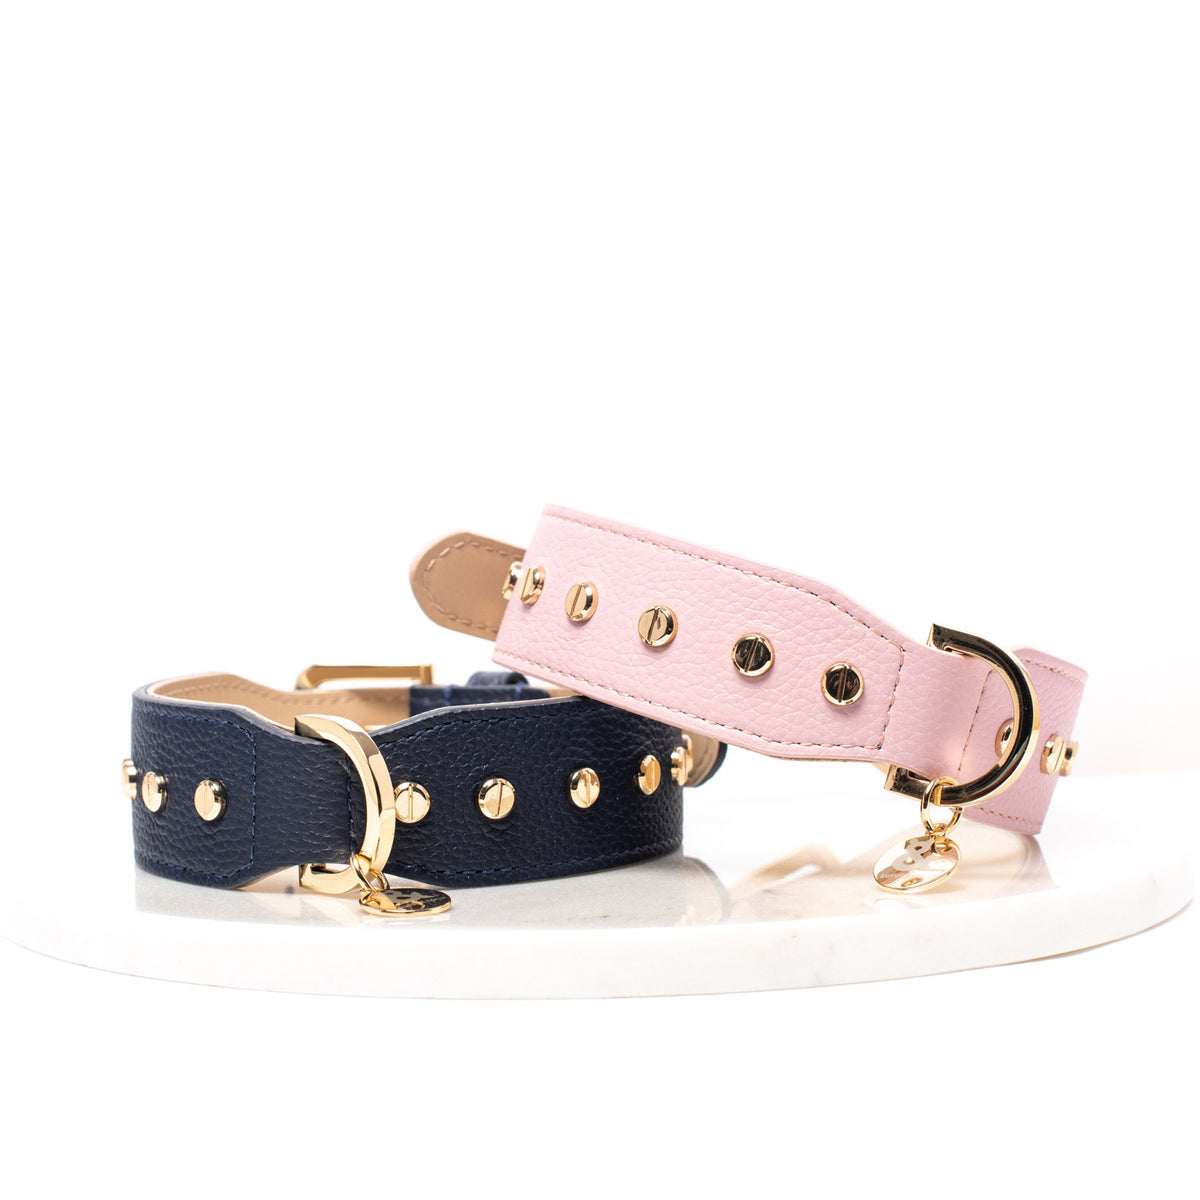 Rufus & Coco's Berlin Navy leather dog collar is made from 100% quality leather. Each collar is finished with premium gold hardware and studs for style and durability. The Navy leather dog collar is available in 4 sizes.